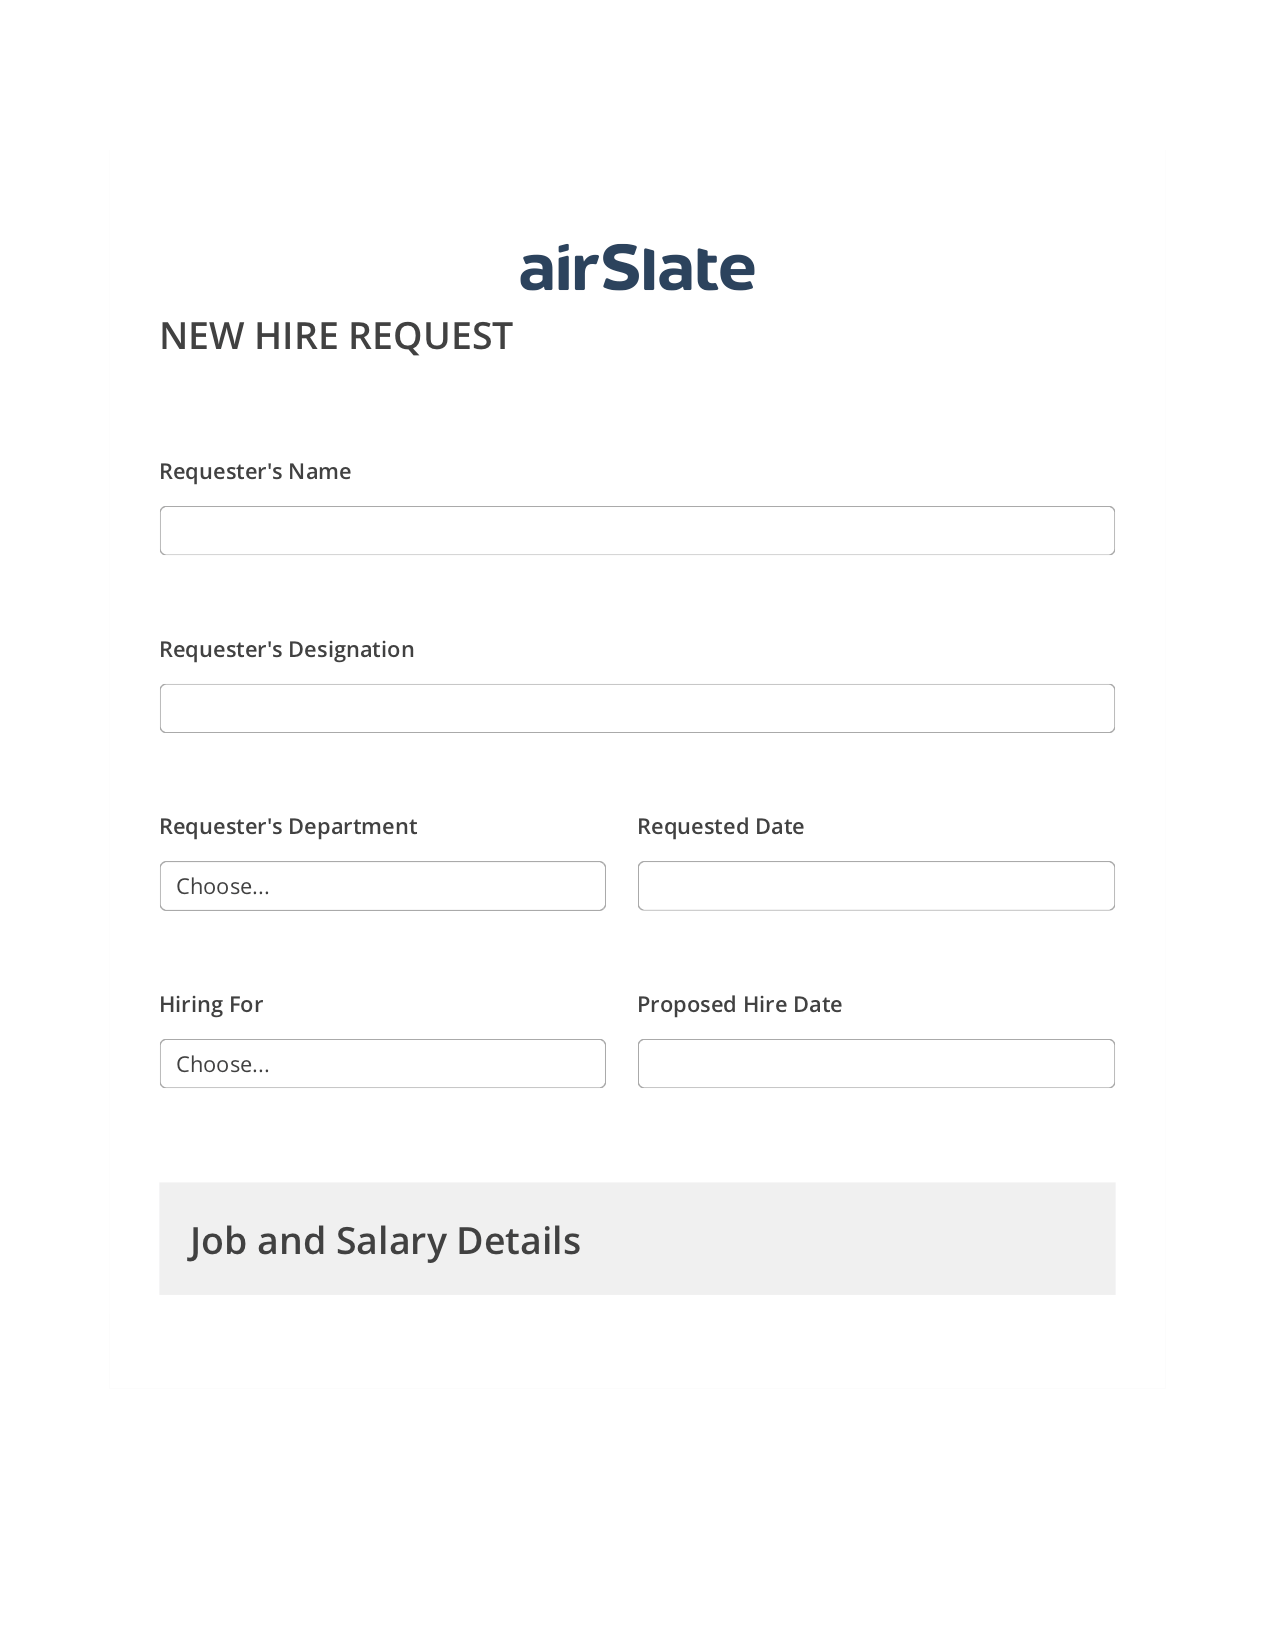 Hiring Request Workflow Pre-fill from another Slate Bot, Send Mailchimp Campaign Bot, Export to WebMerge Bot